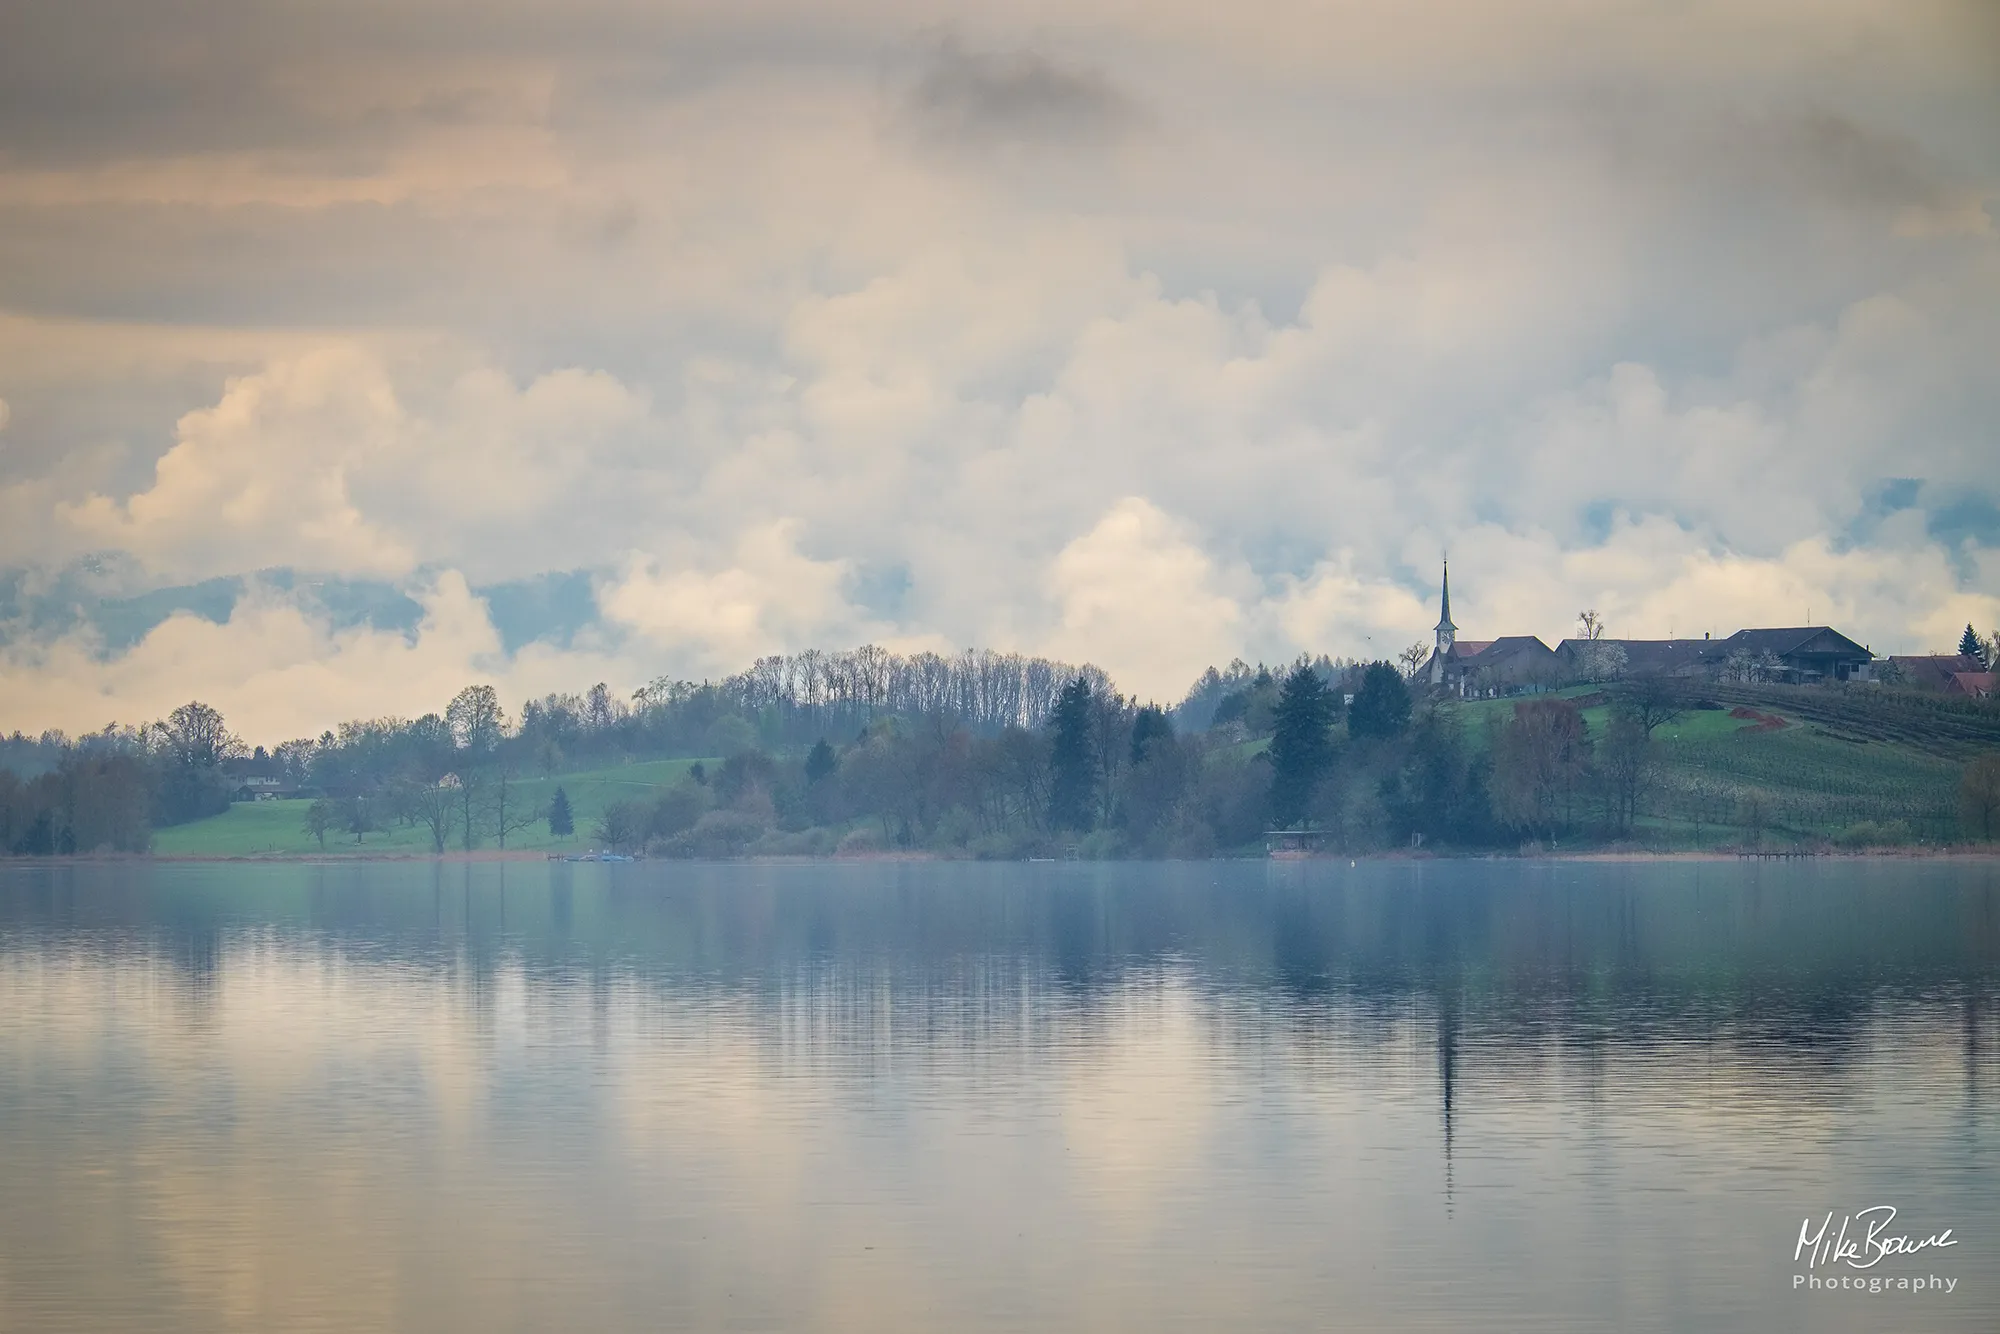 Hazy clouds over lake with mist on shoreline blurring church spire and trees